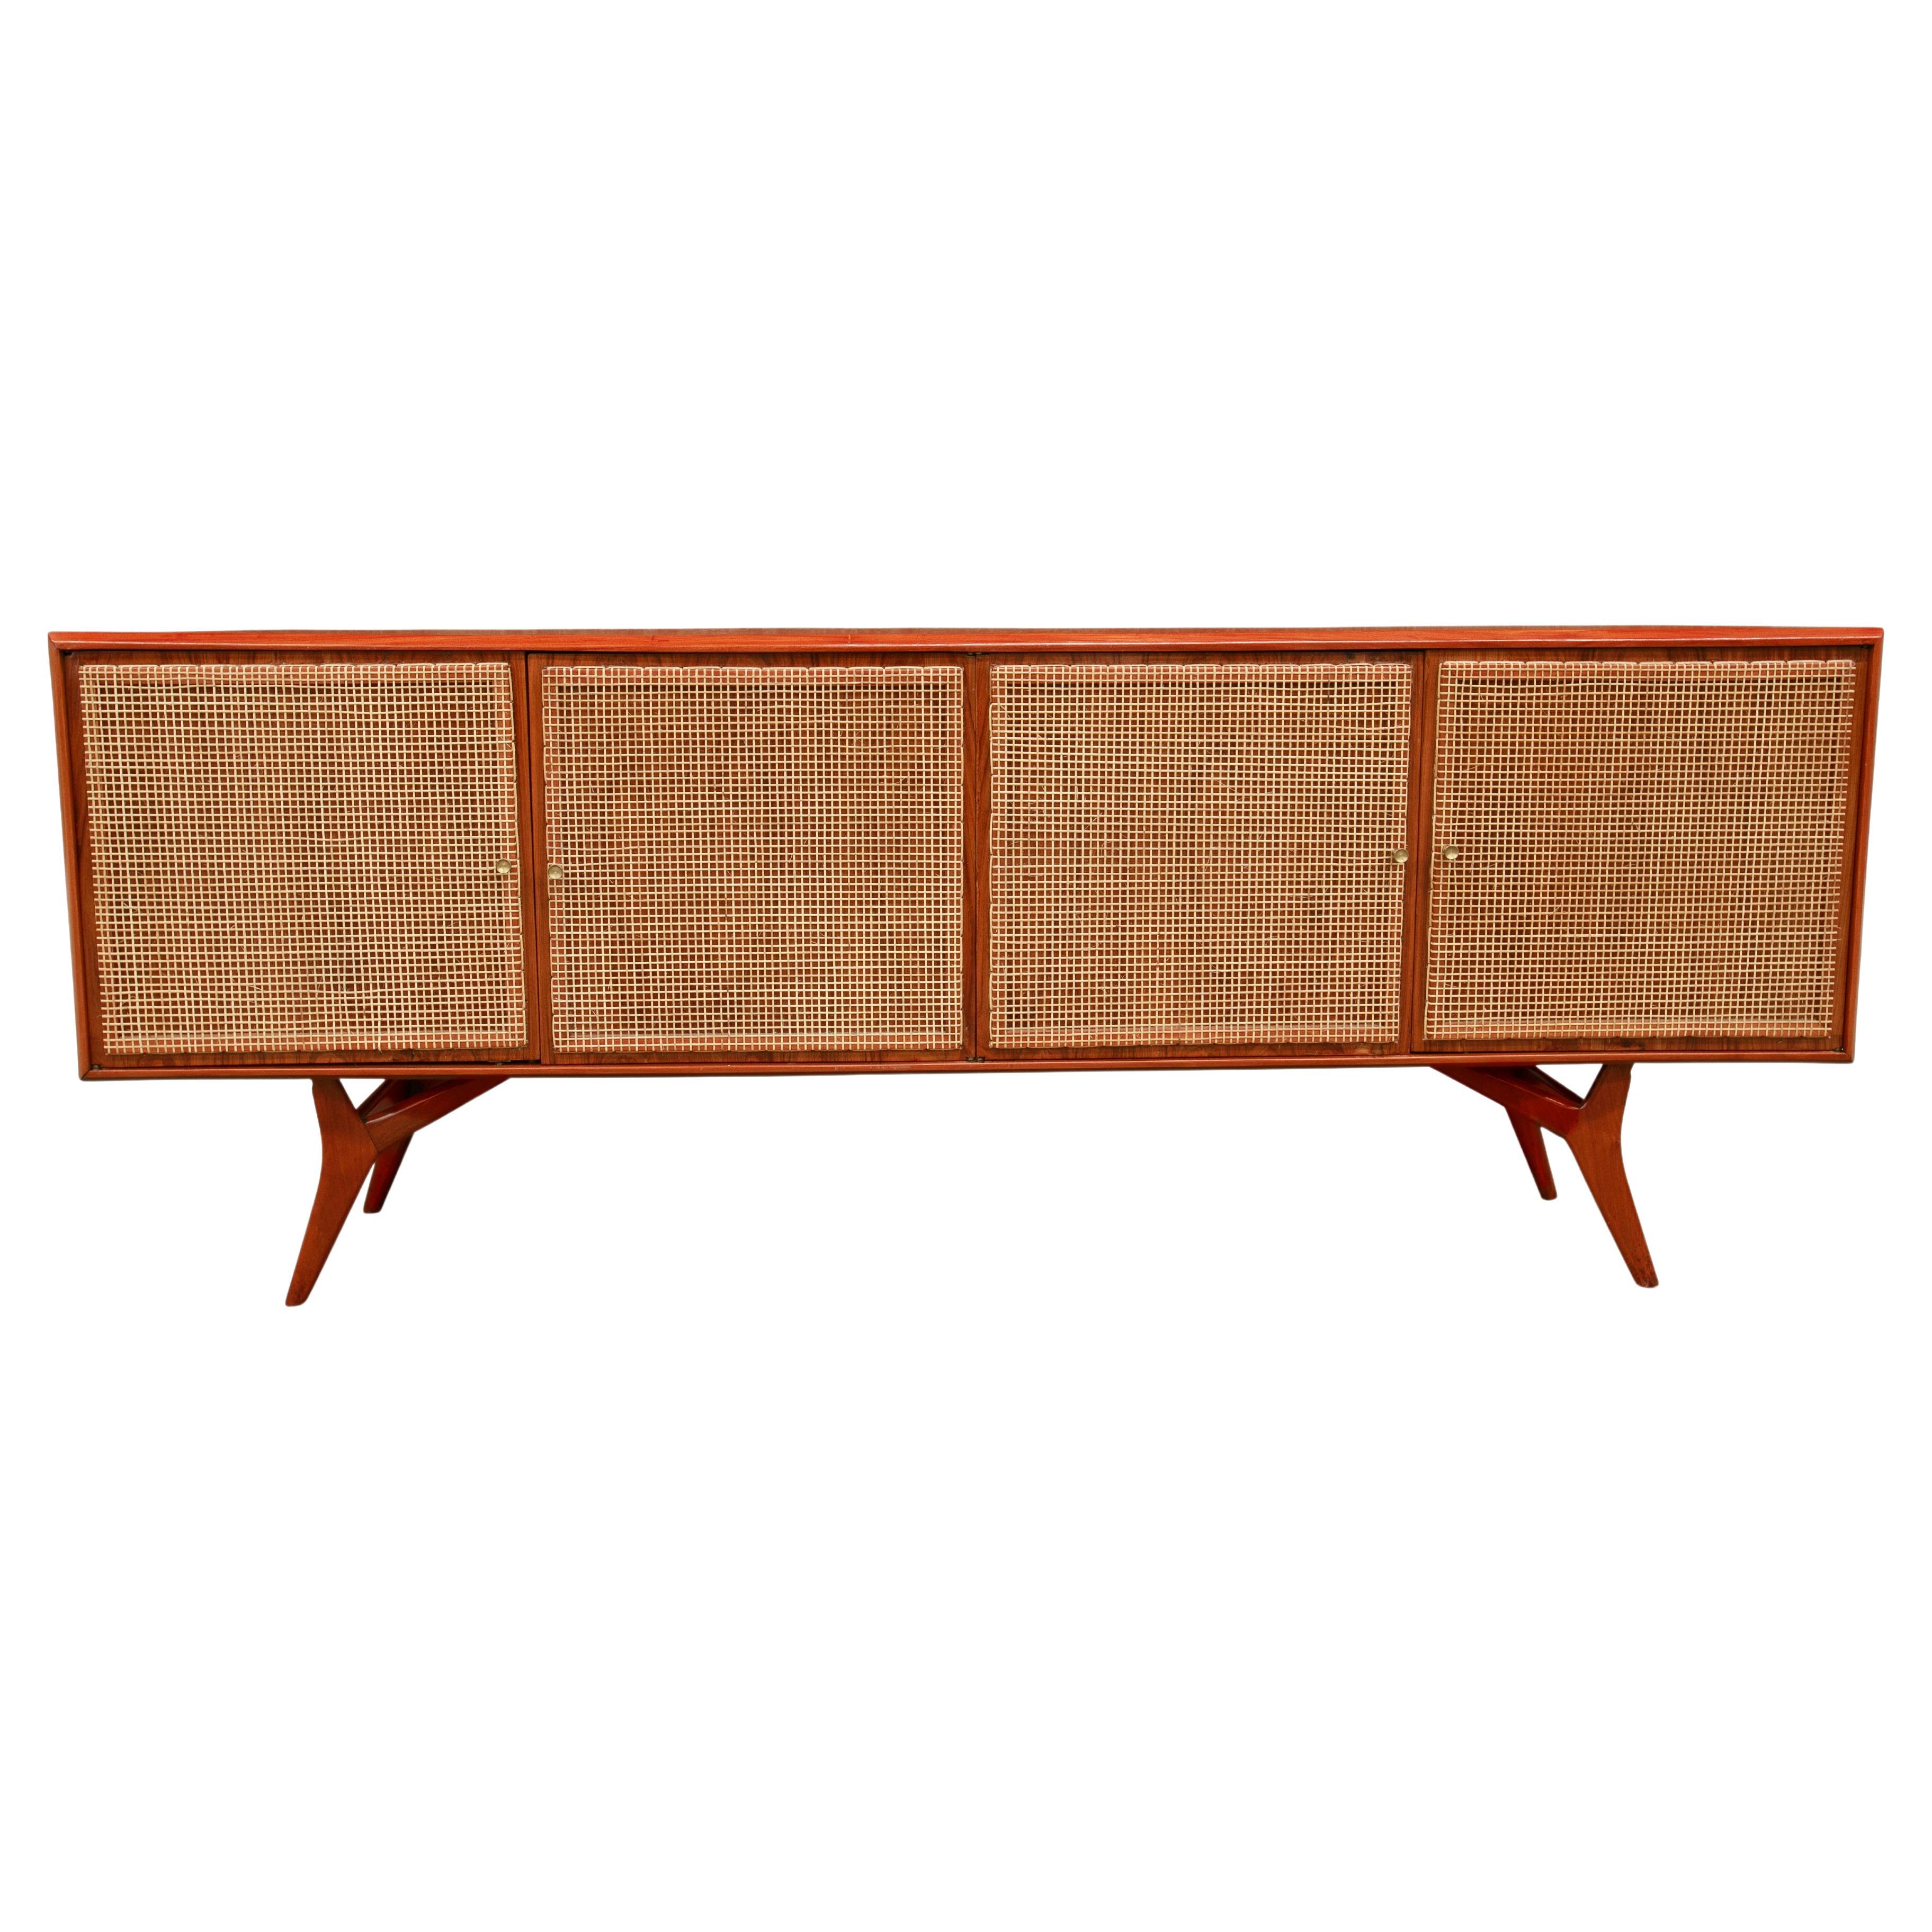 Available today, this Brazilian modern credenza, designed by Forma in the 1950’s, is a true masterpiece! The frame of the credenza is made with caviuna hardwood and the outside of the four doors have a straw weaving. Inside the four doors are